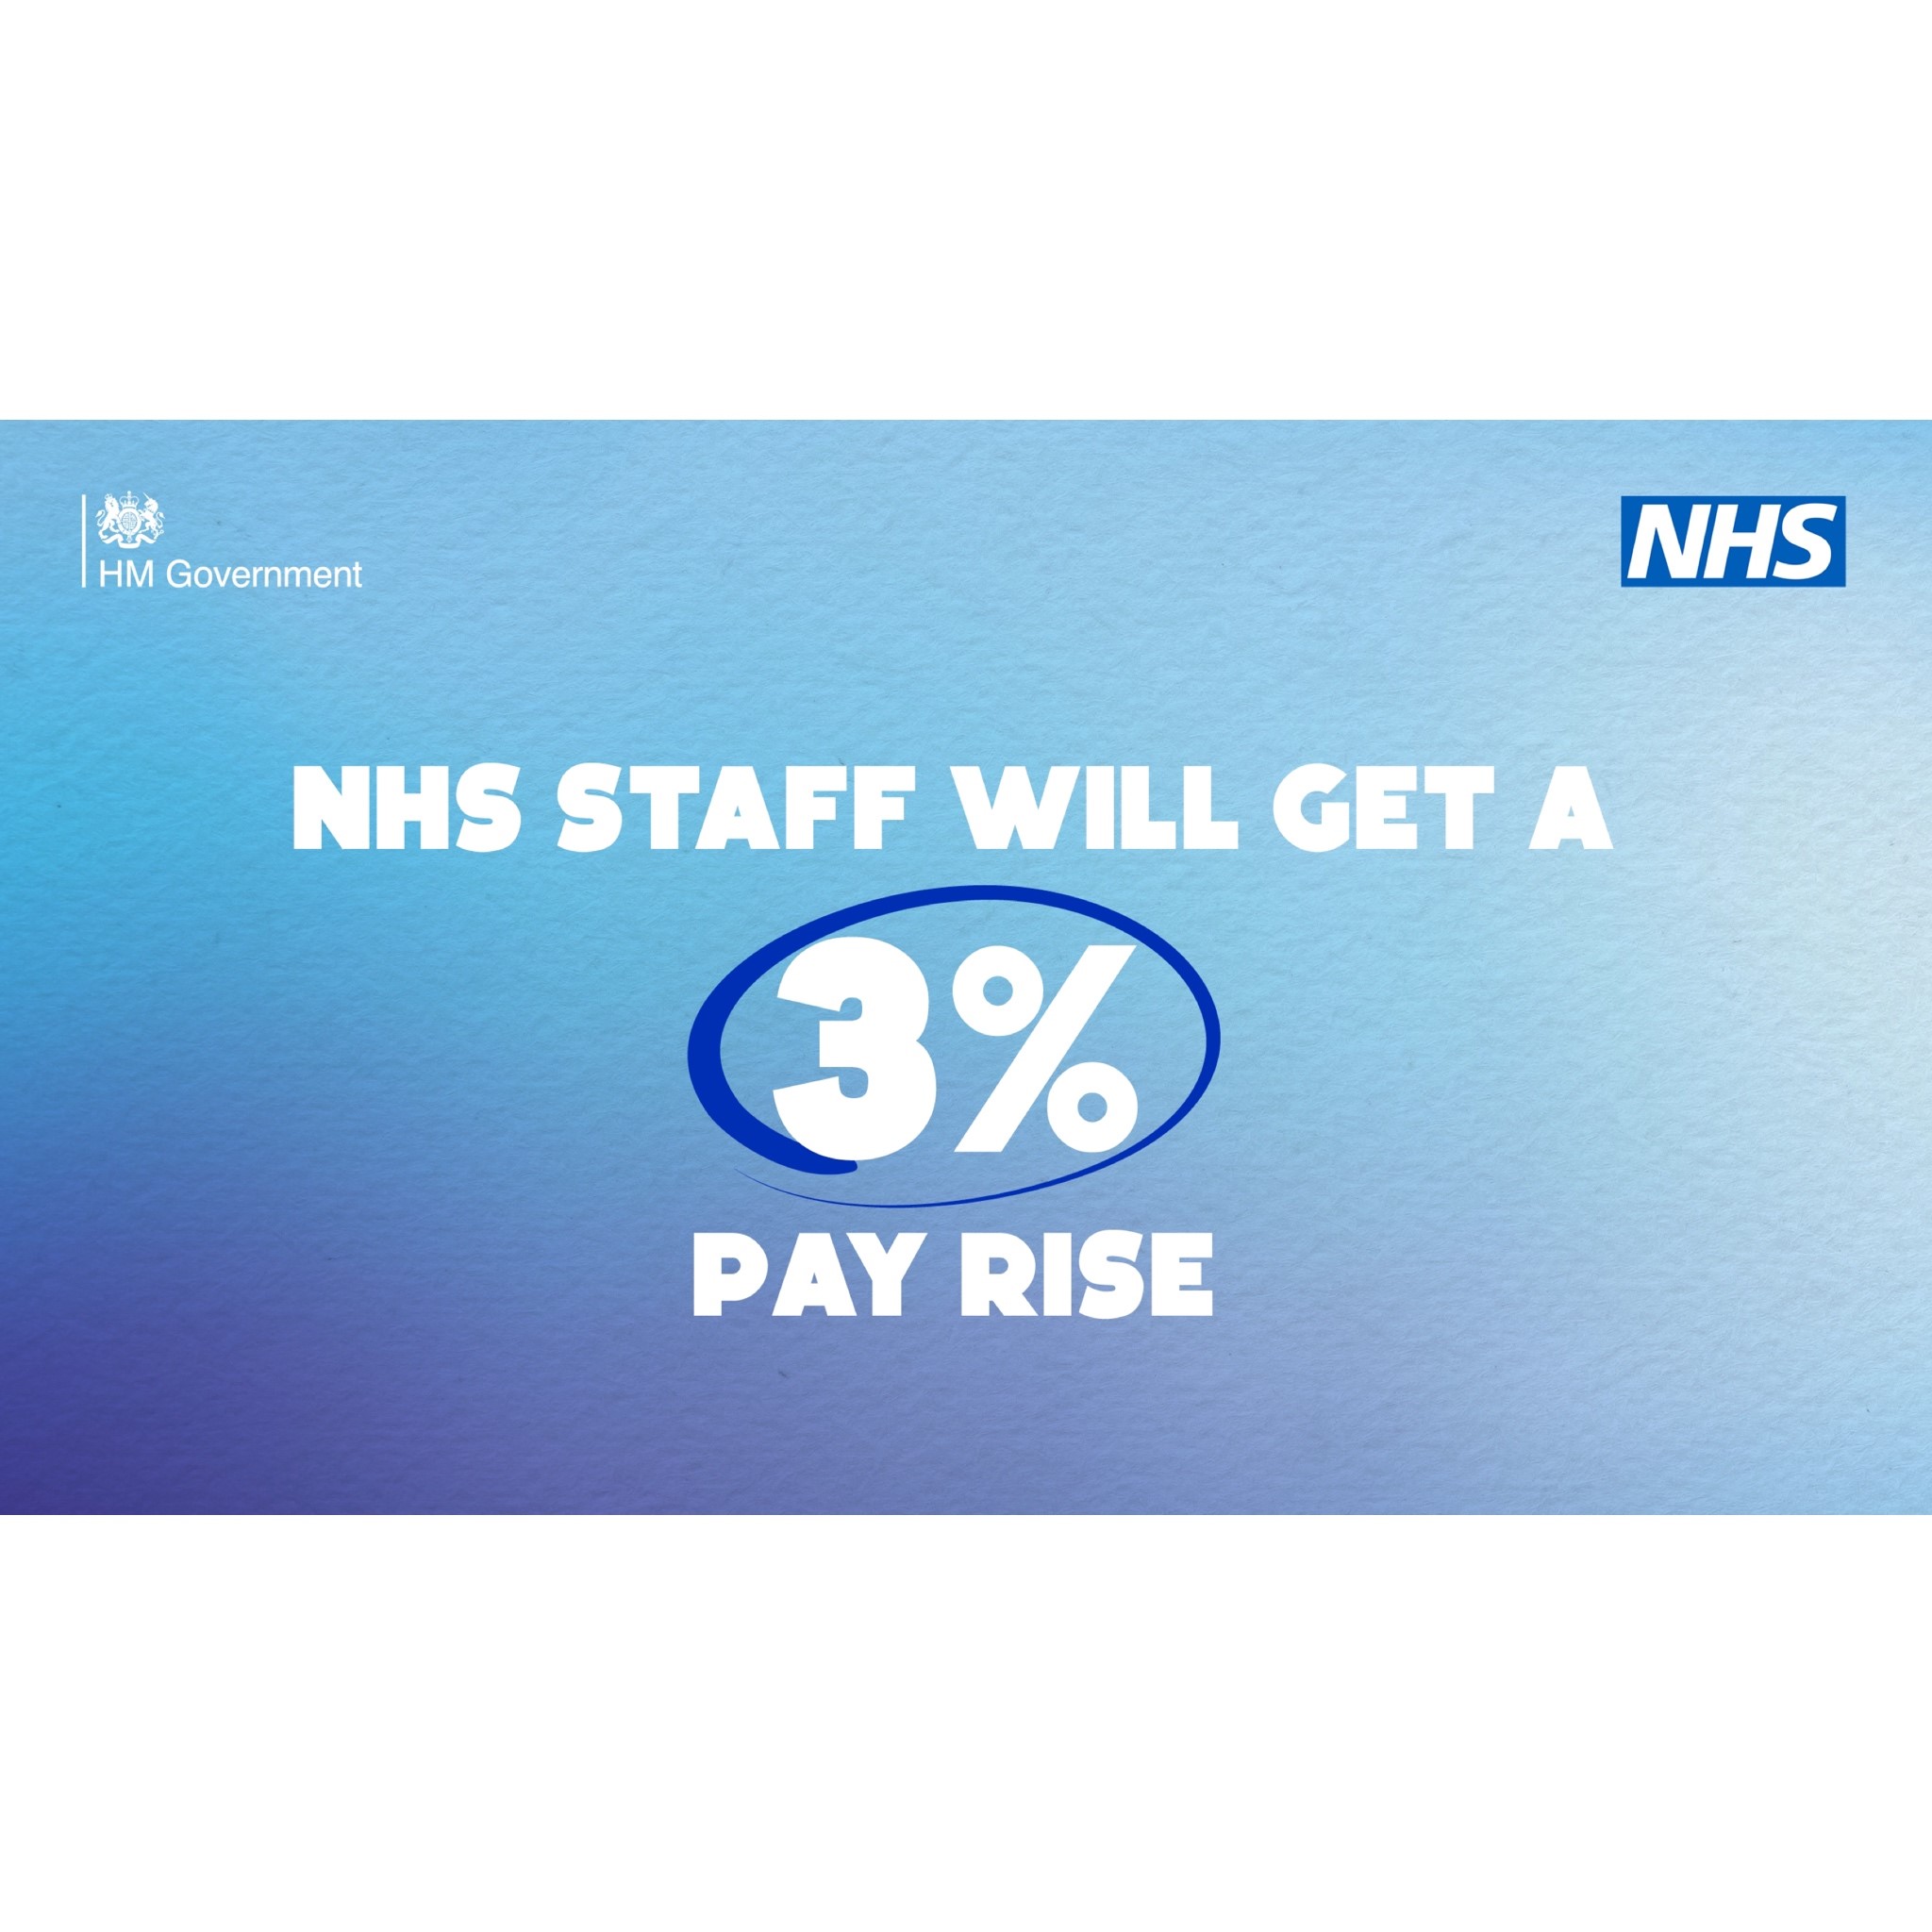 NHS Staff to Receive 3 Pay Rise Rebecca Harris